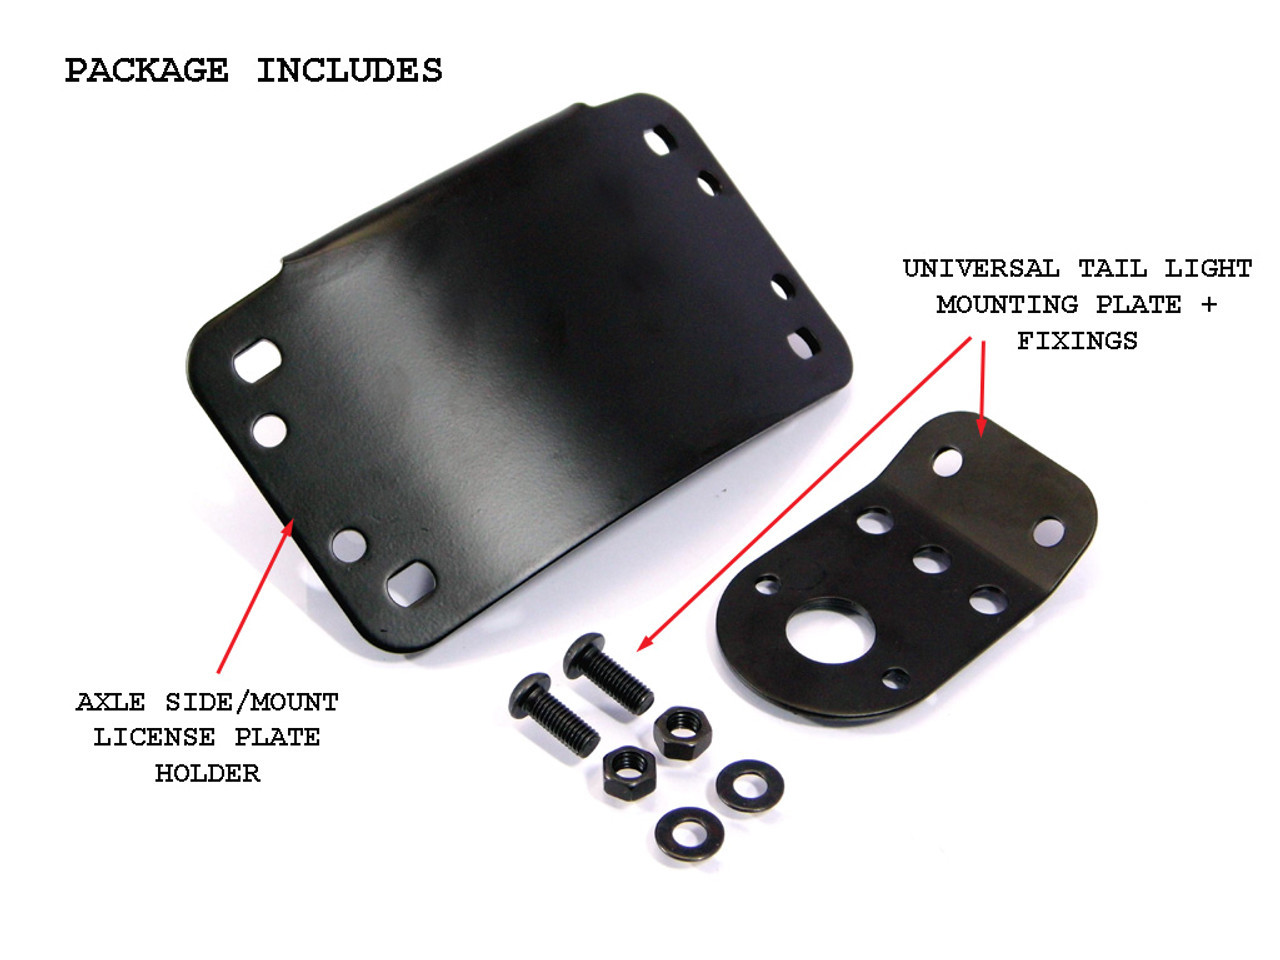 https://cdn11.bigcommerce.com/s-27sjqhowlf/images/stencil/1280x1280/products/3300/29854/007_BLACK_CURVED_SIDE_AXLE_MOUNT_LICENSE_PLATE_BRACKET__52196__57764.1670543187.jpg?c=1&imbypass=on